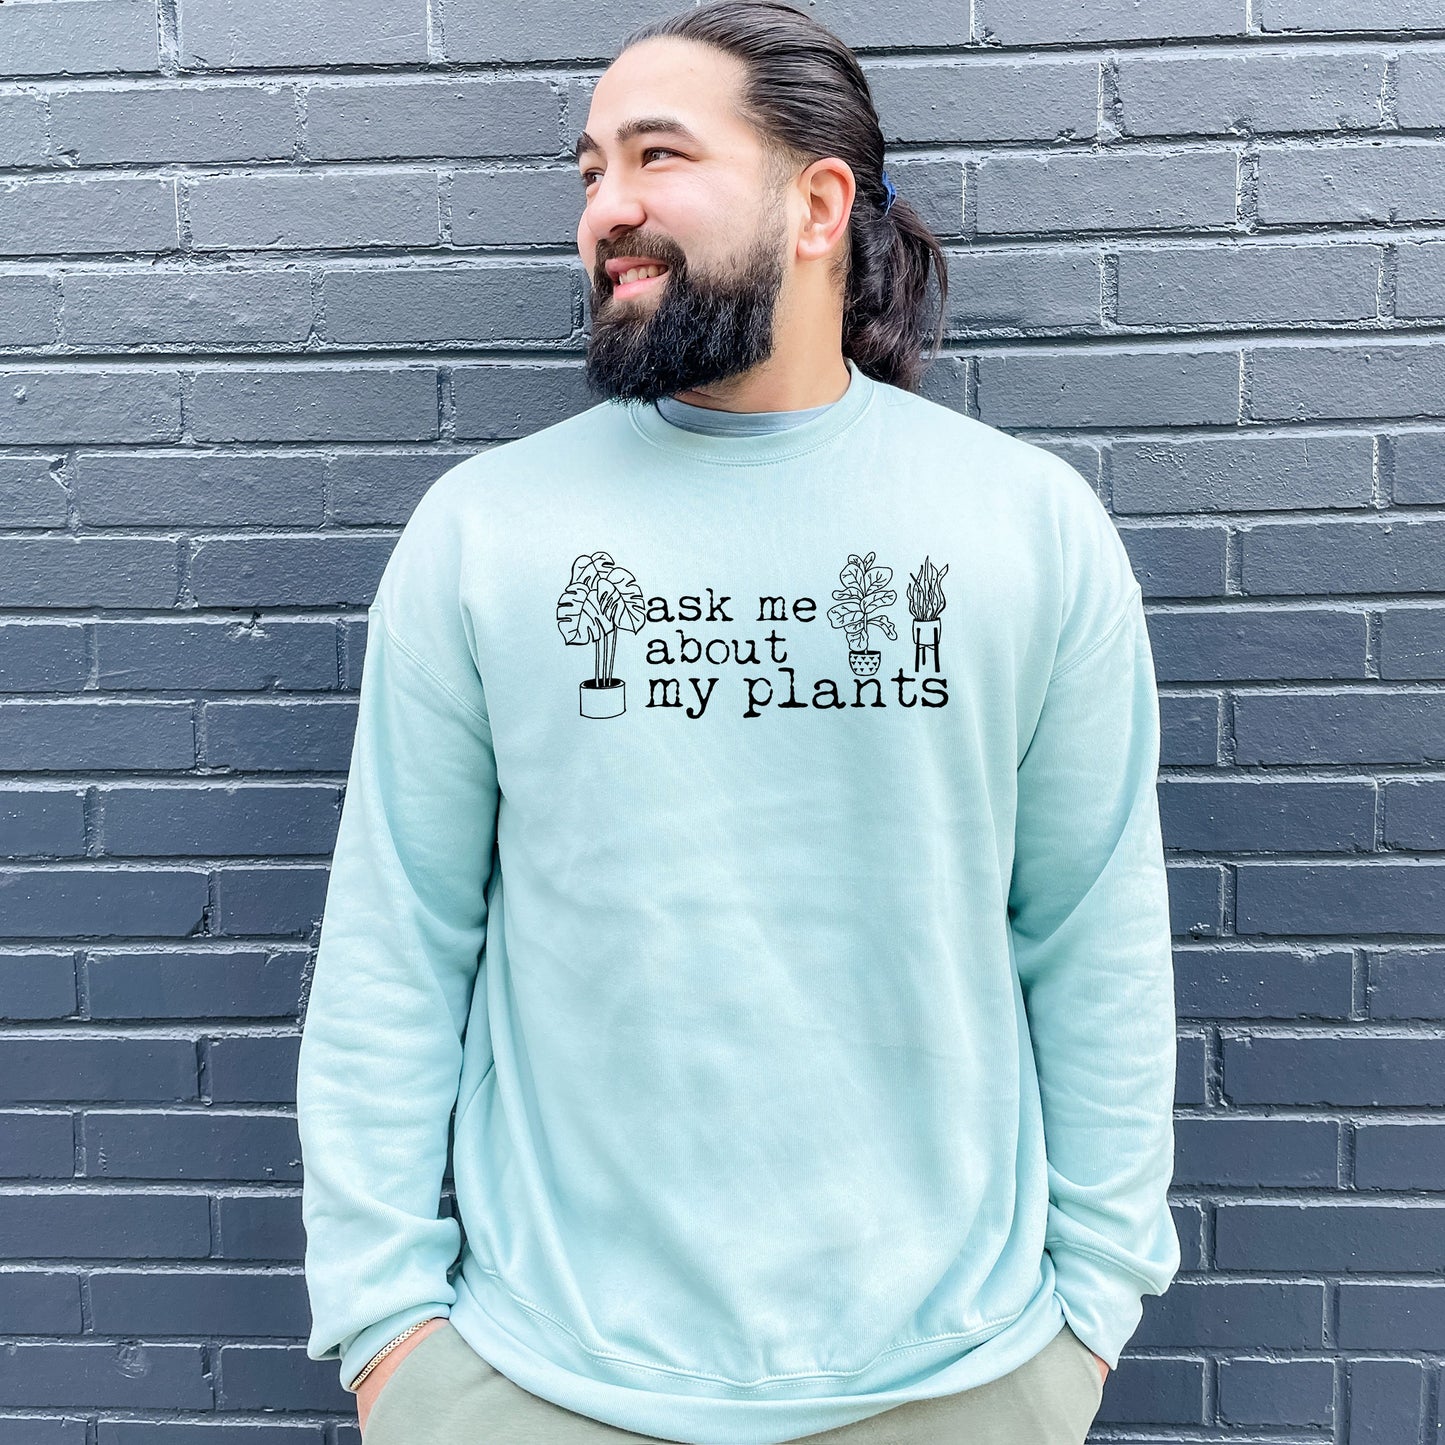 a man with a beard wearing a sweatshirt that says ask me about my plants